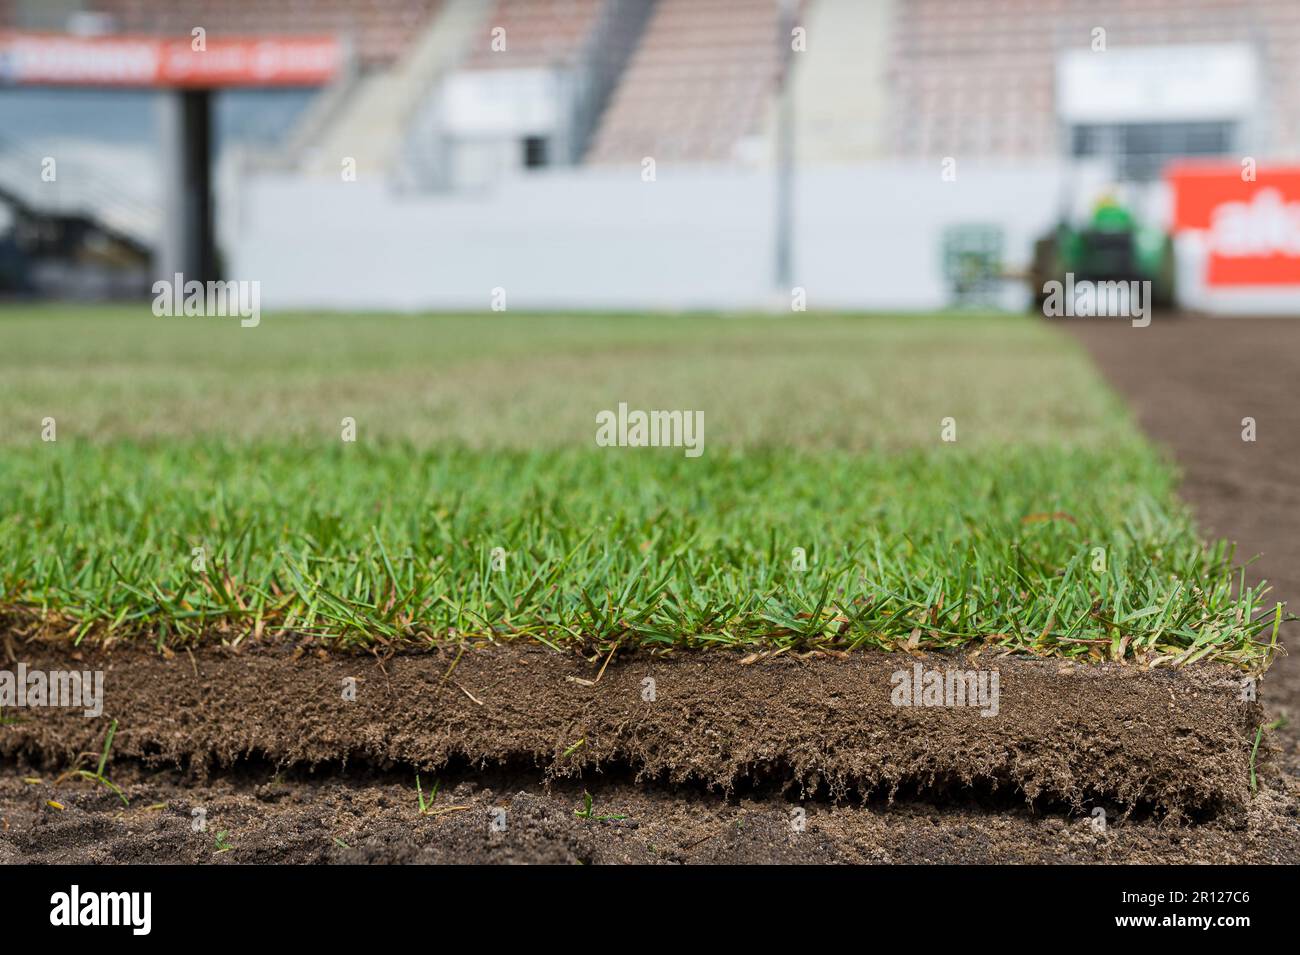 A piece of new grass from a roll laying on a football pitch. Stock Photo